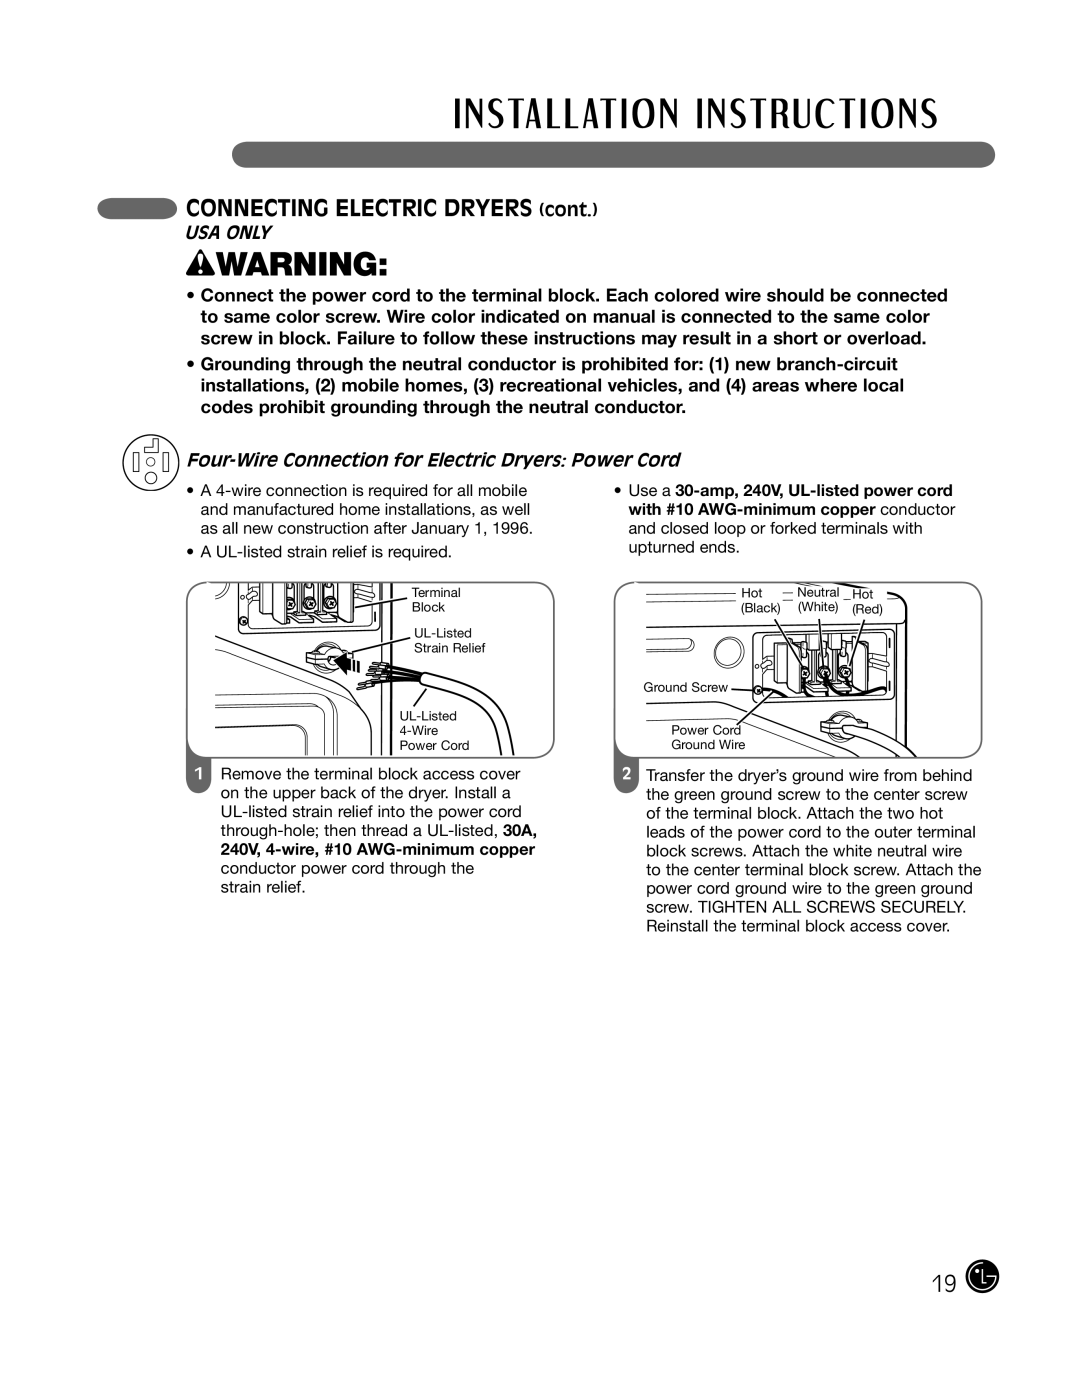 LG Electronics P154 manual wWARNING, CONNECTING ELECTRIC DRYERS cont, Usa Only 